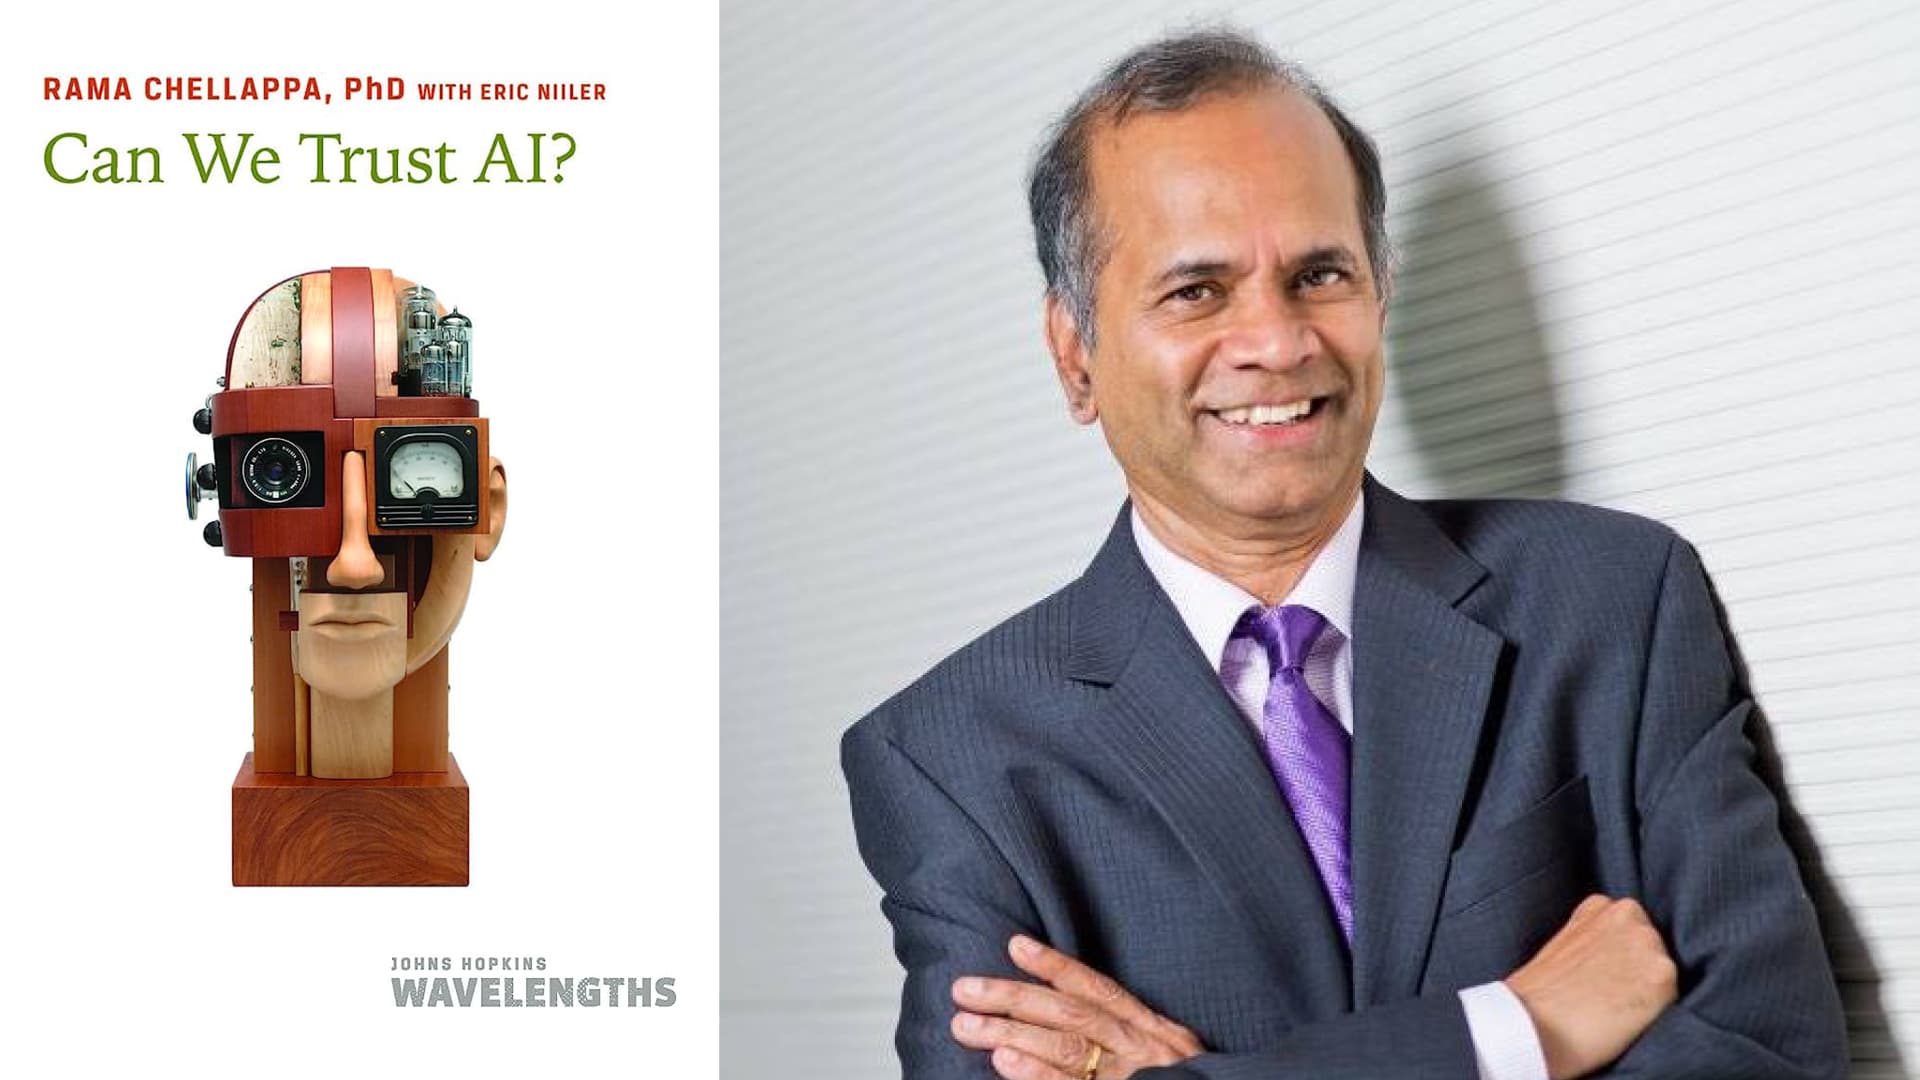 "Can We Trust AI?" by Terp Rama Chellappa book cover